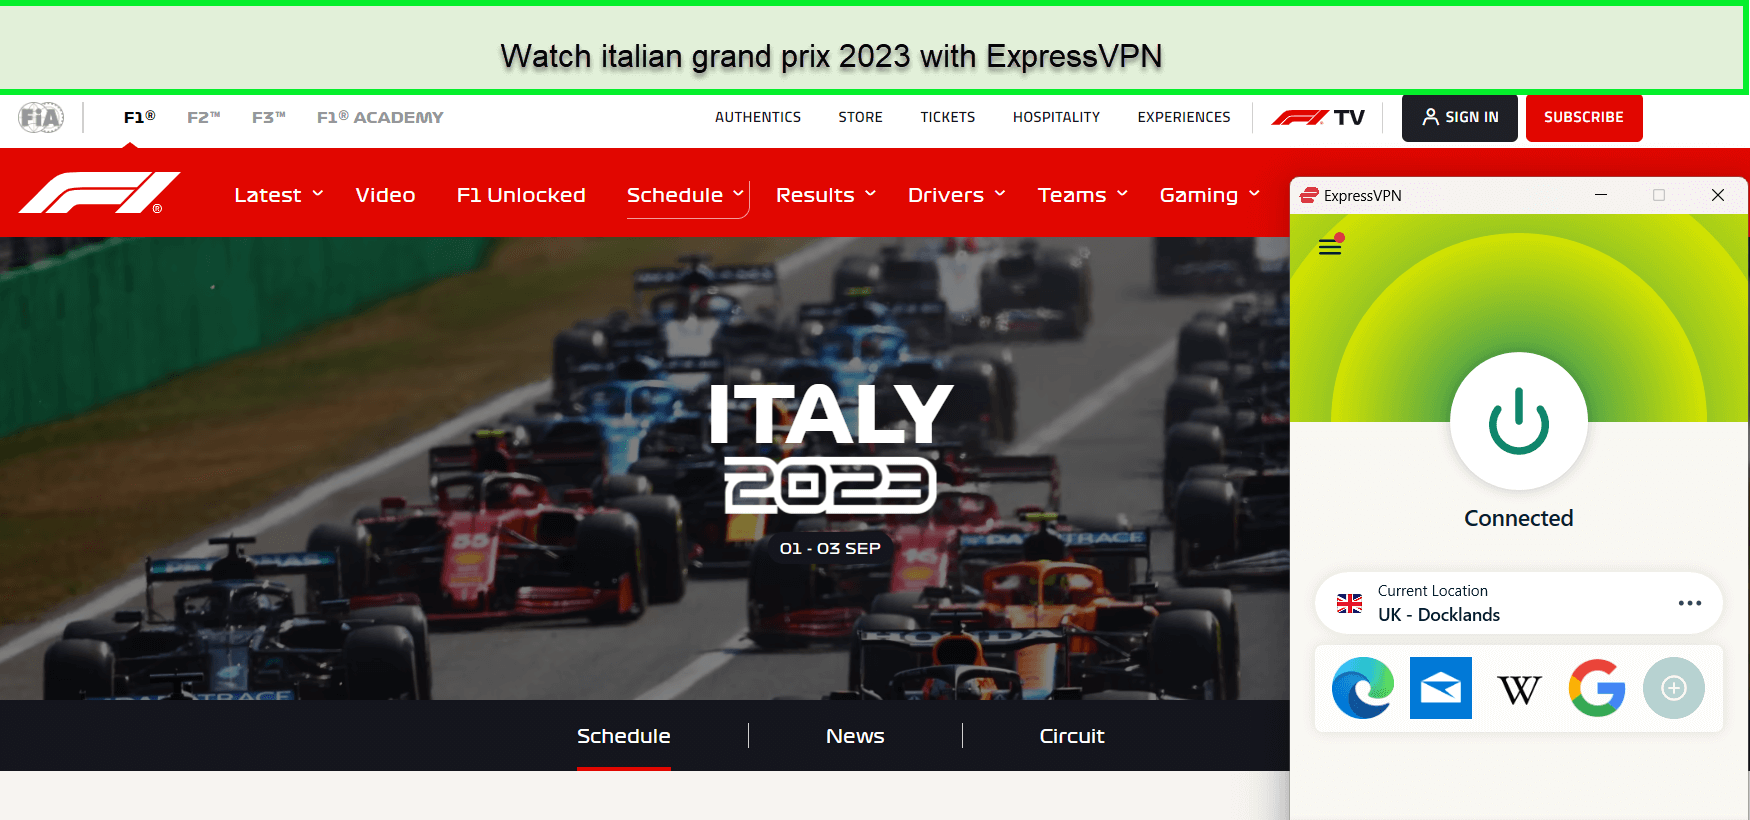 How-to-Watch-Italian-Grand-Prix-2023-in-Hong Kong-on-ITV-with-ExpressVPN